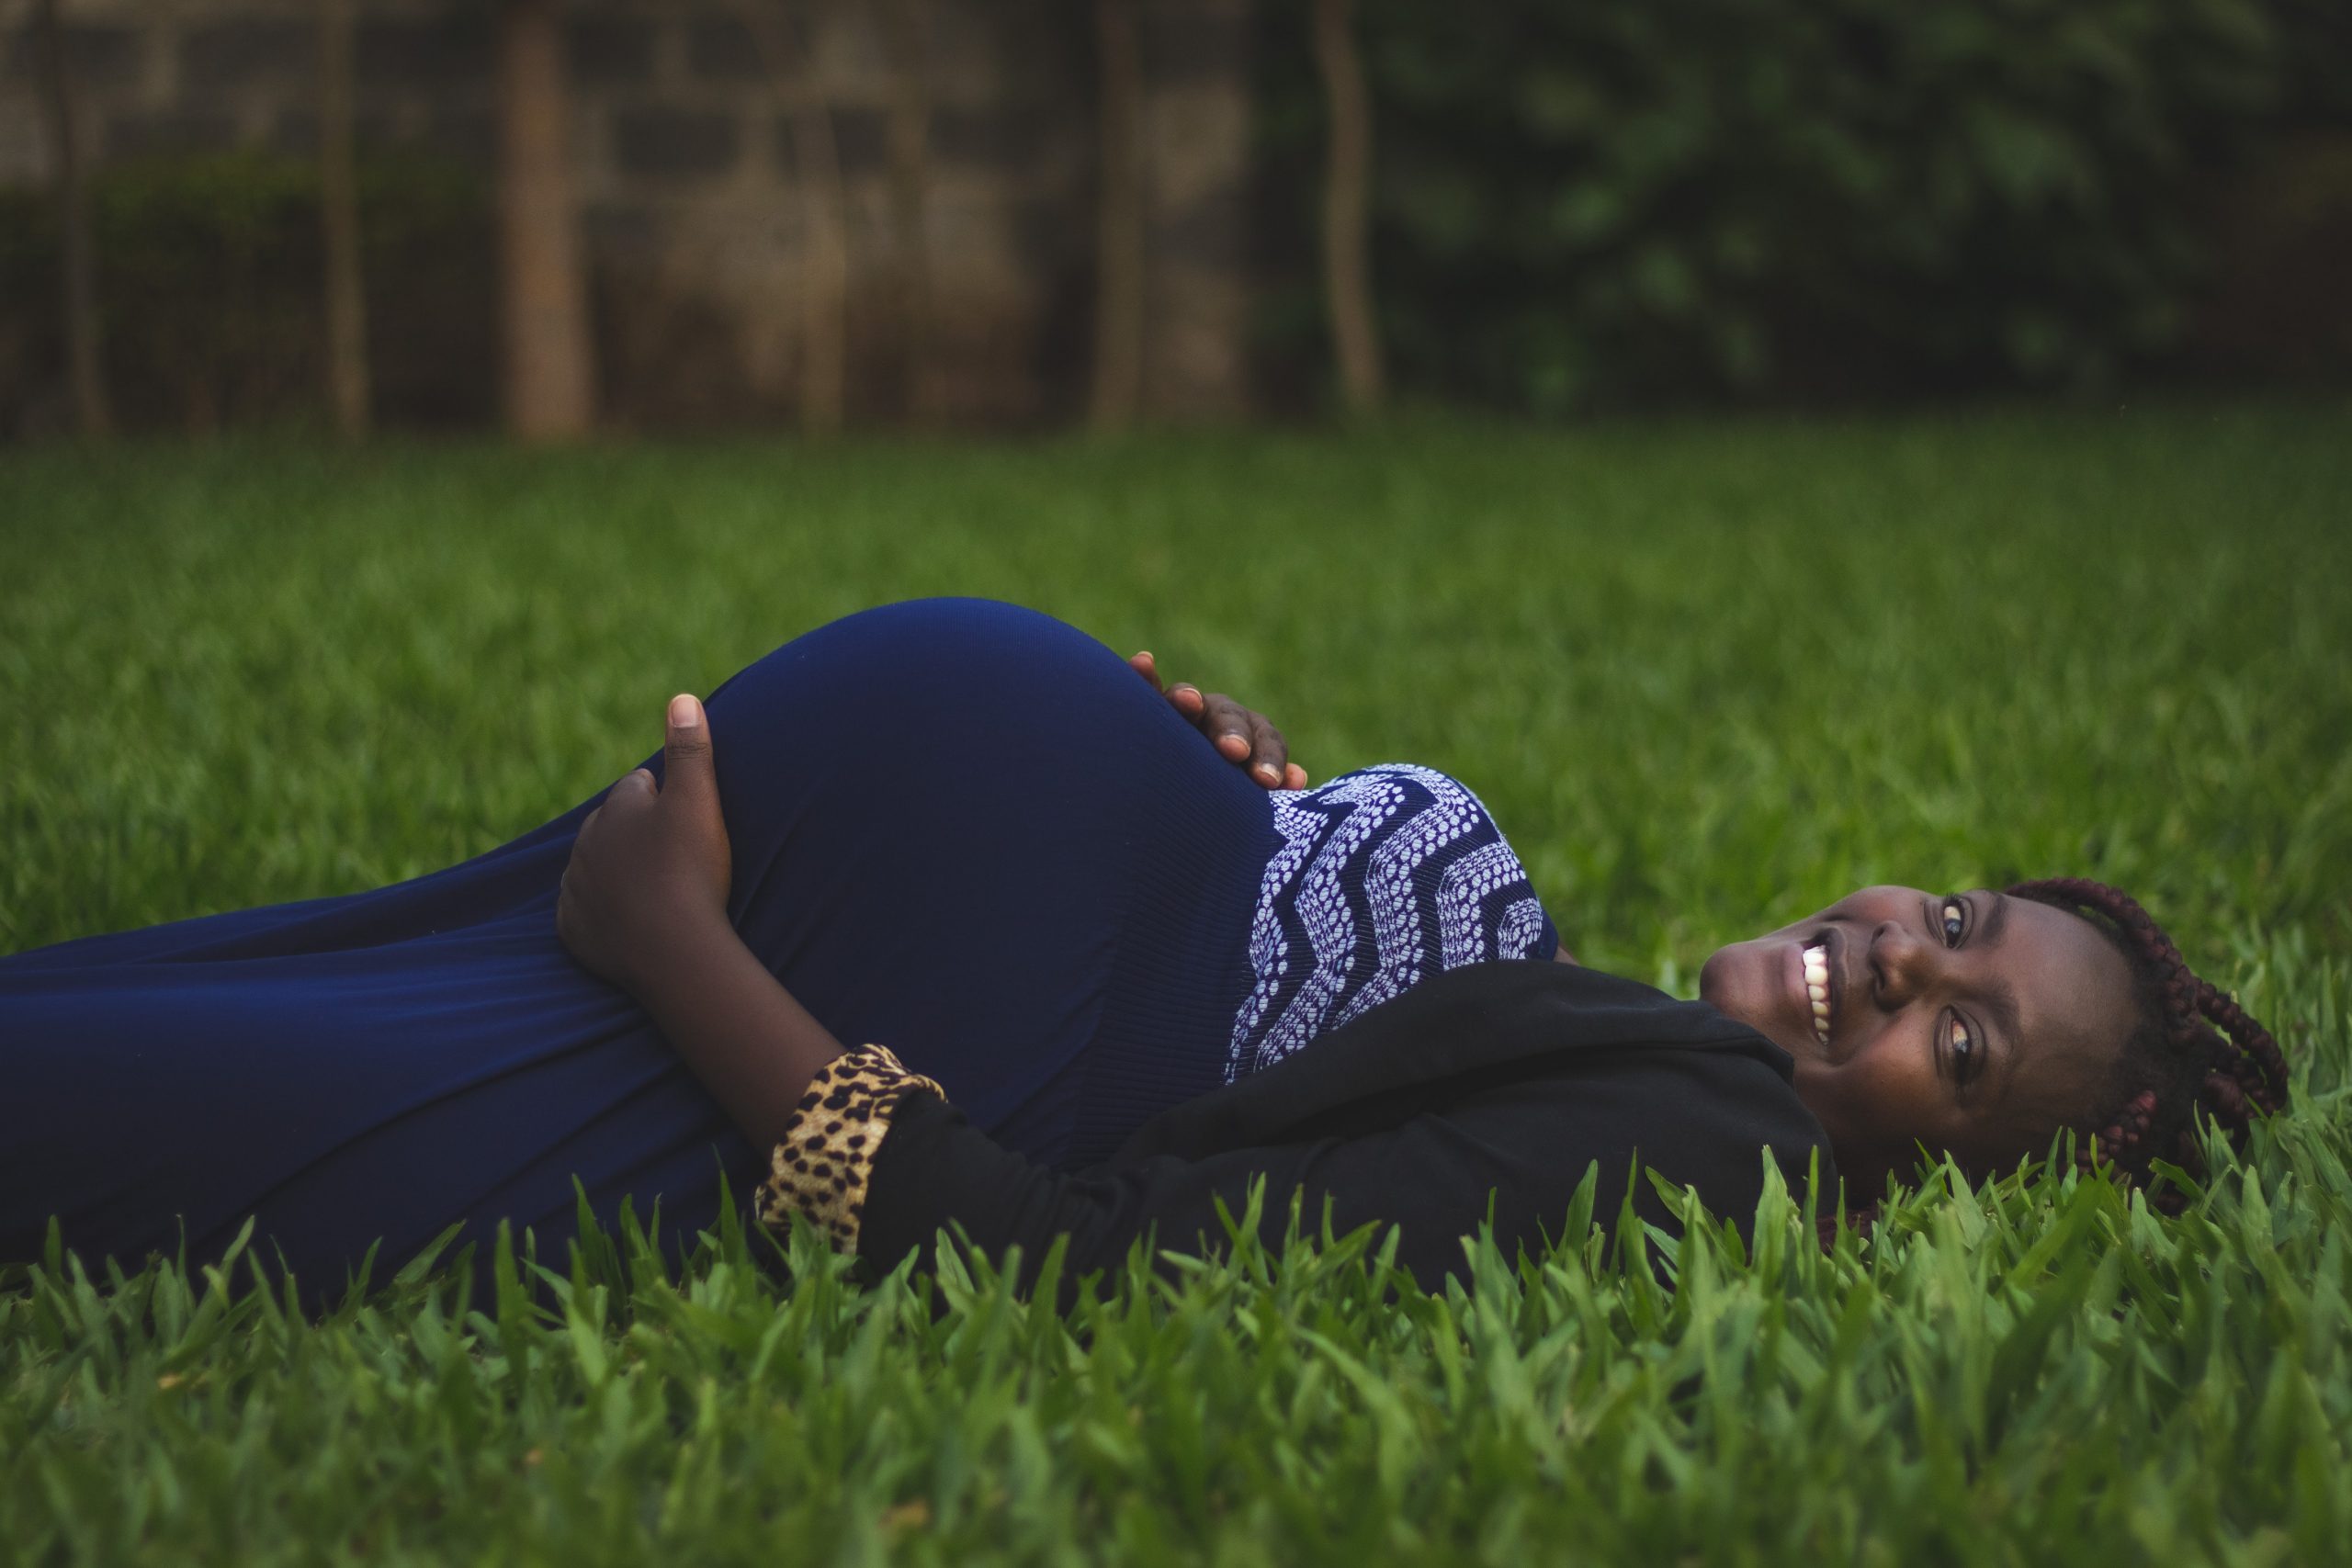 A smiling, pregnant Black women wearing a blue dress lays in green grass, symbolizing the risks of being pregnant with coronavirus.